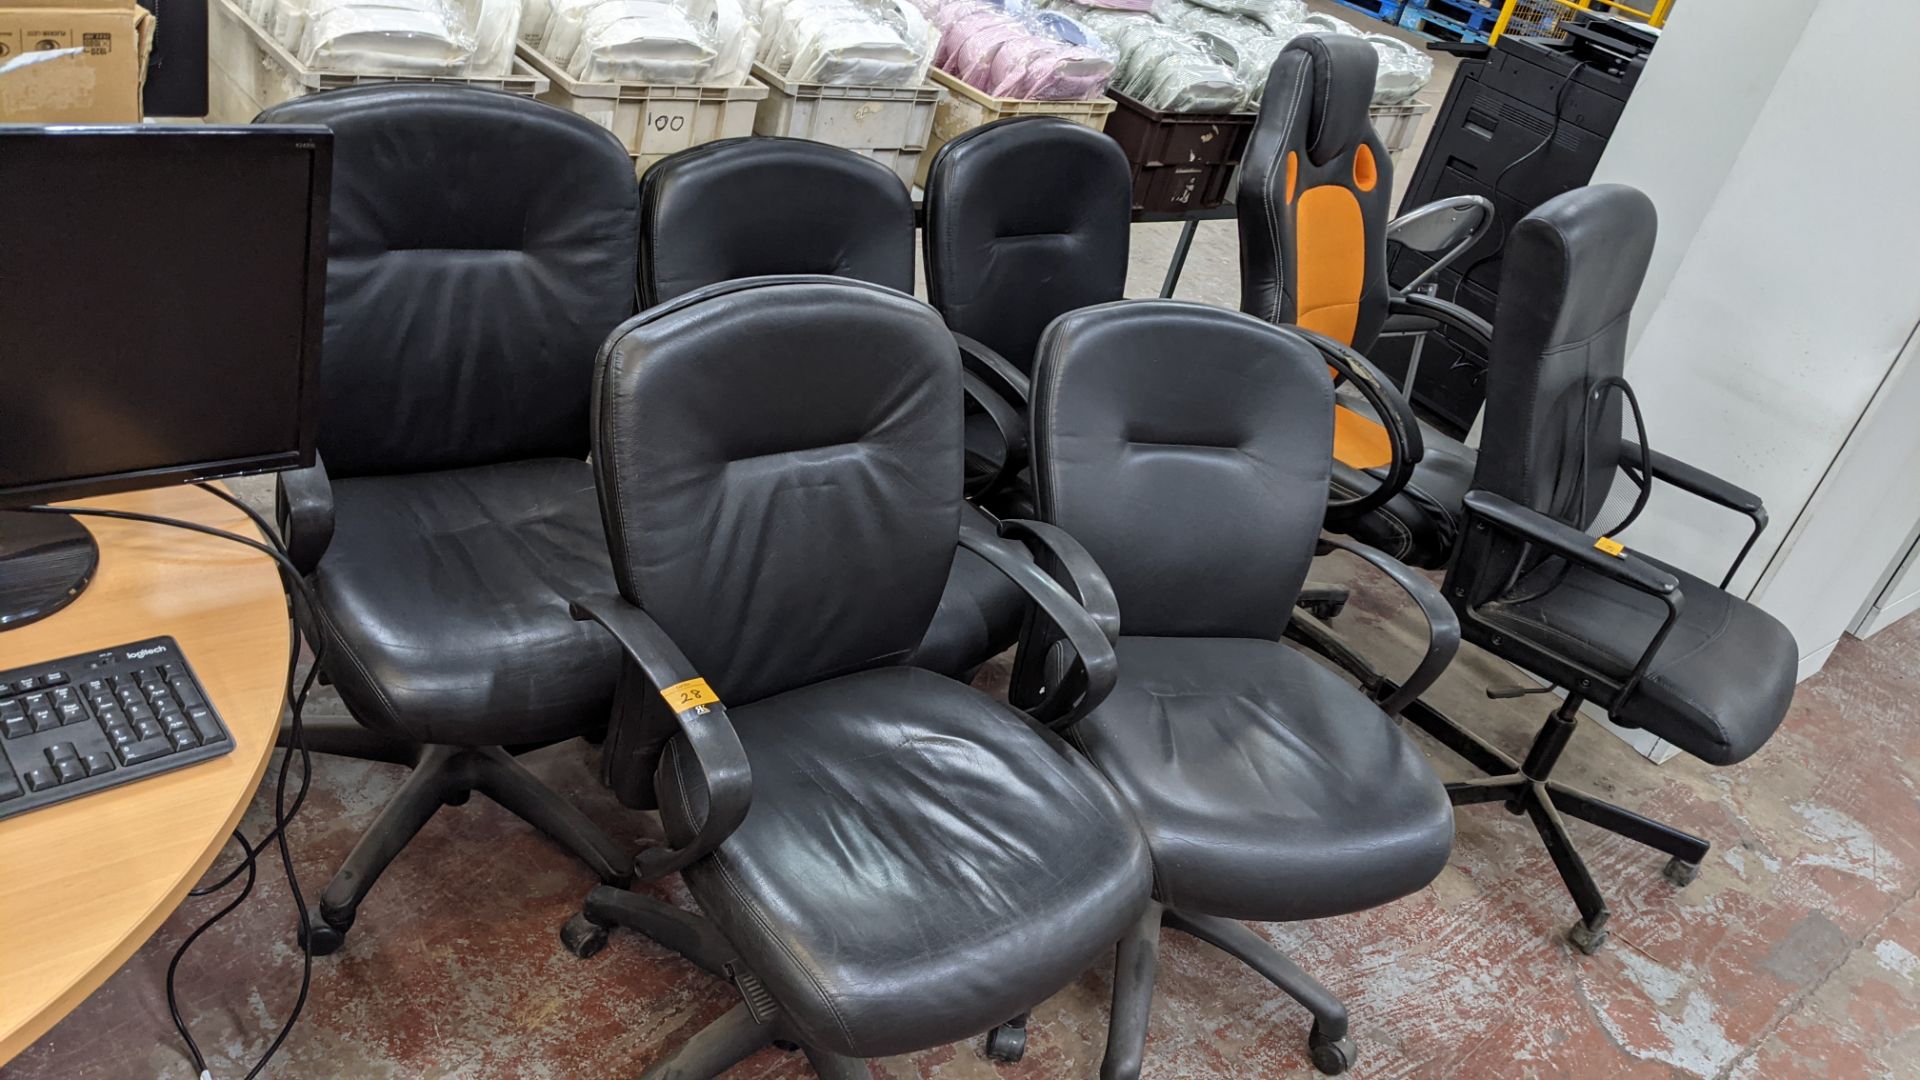 5 off matching leather exec chairs with arms - Image 3 of 6